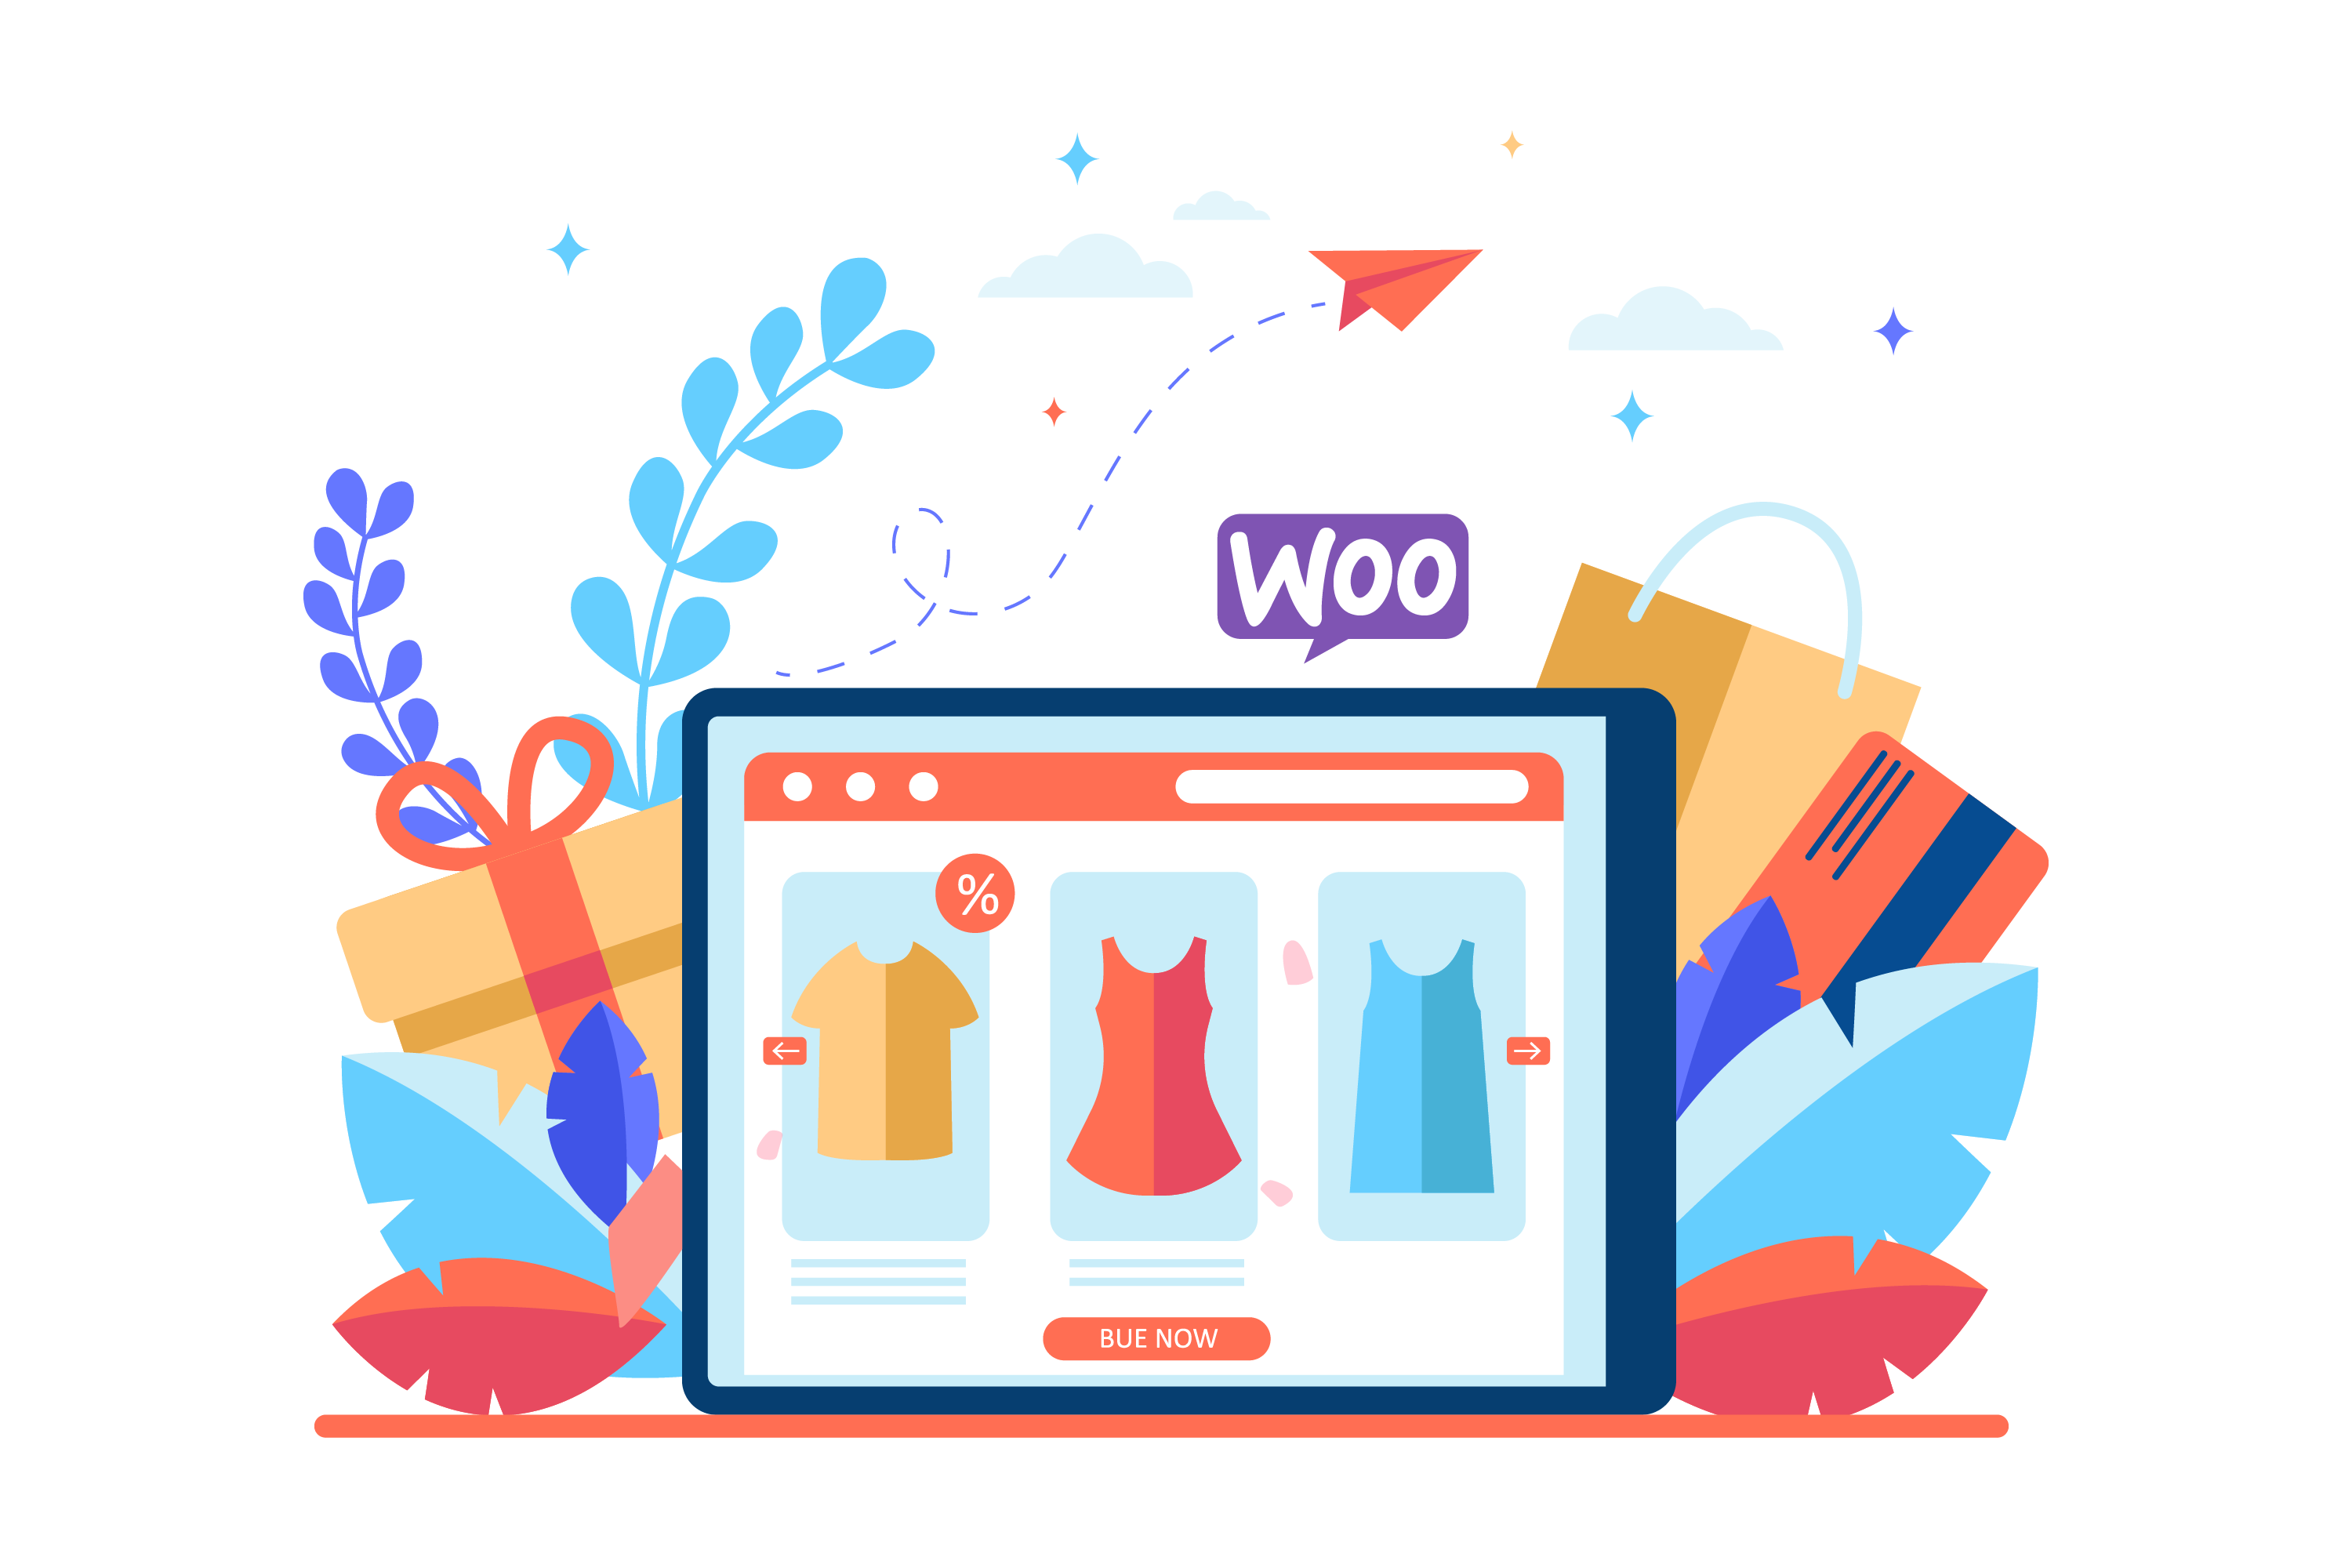 Customise-WooCommerce-to-suit-your-business